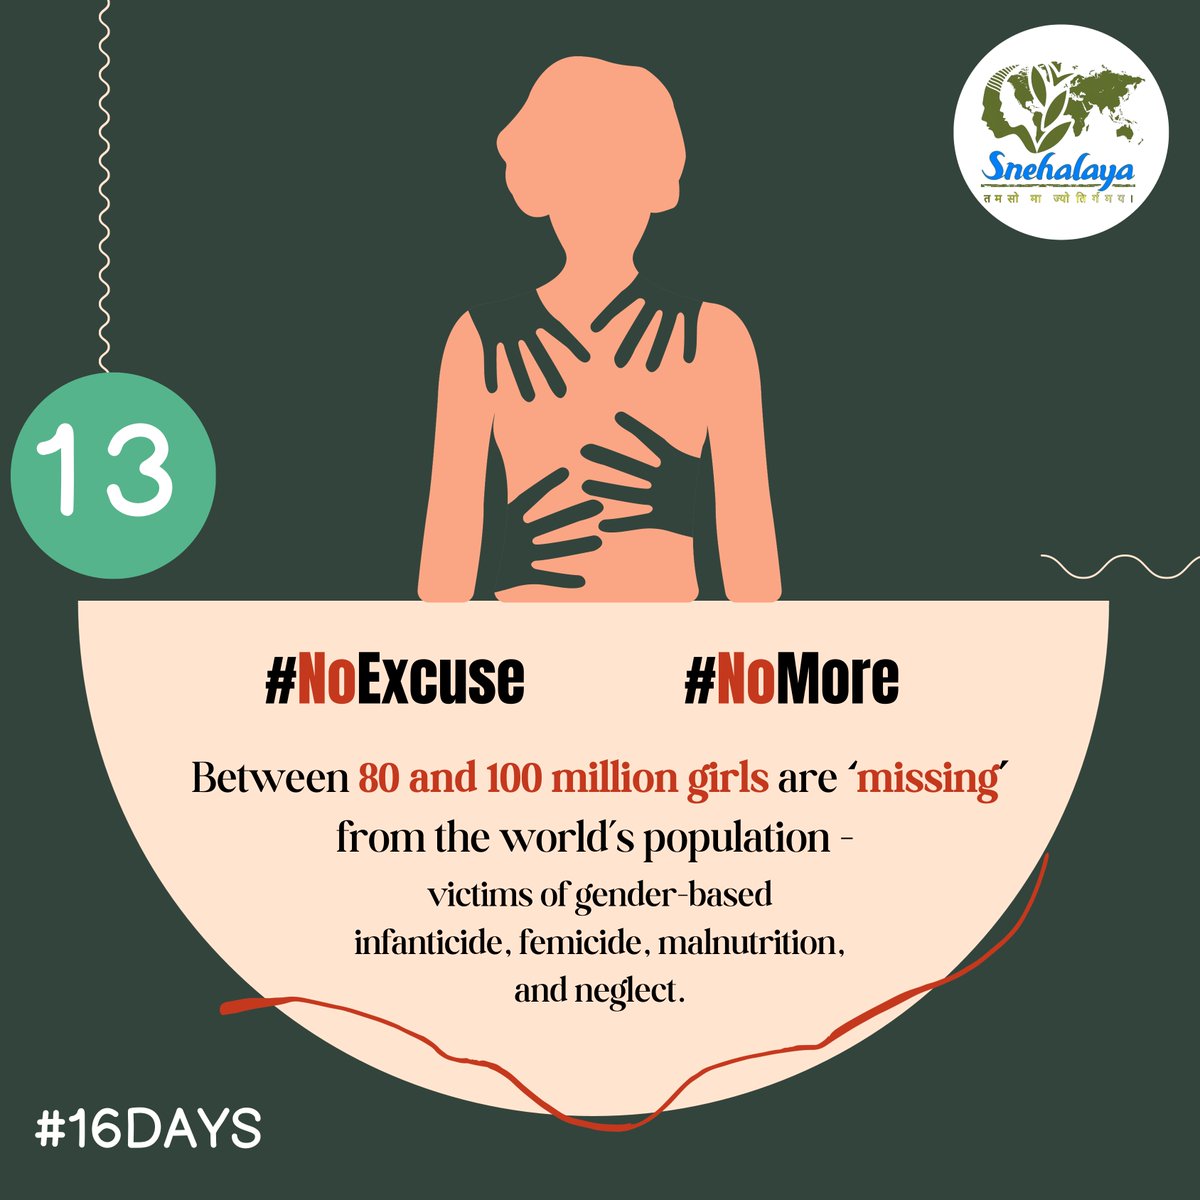 Join us in breaking the tragic cycle of gender-based violence, infanticide, malnutrition, and neglect. Together, let's create a world free from violence and inequality. 

#EndGenderViolence #StopInfanticide #EmpowerOurYouth #equalitymatters #endviolence #endabuse #GBV #16days